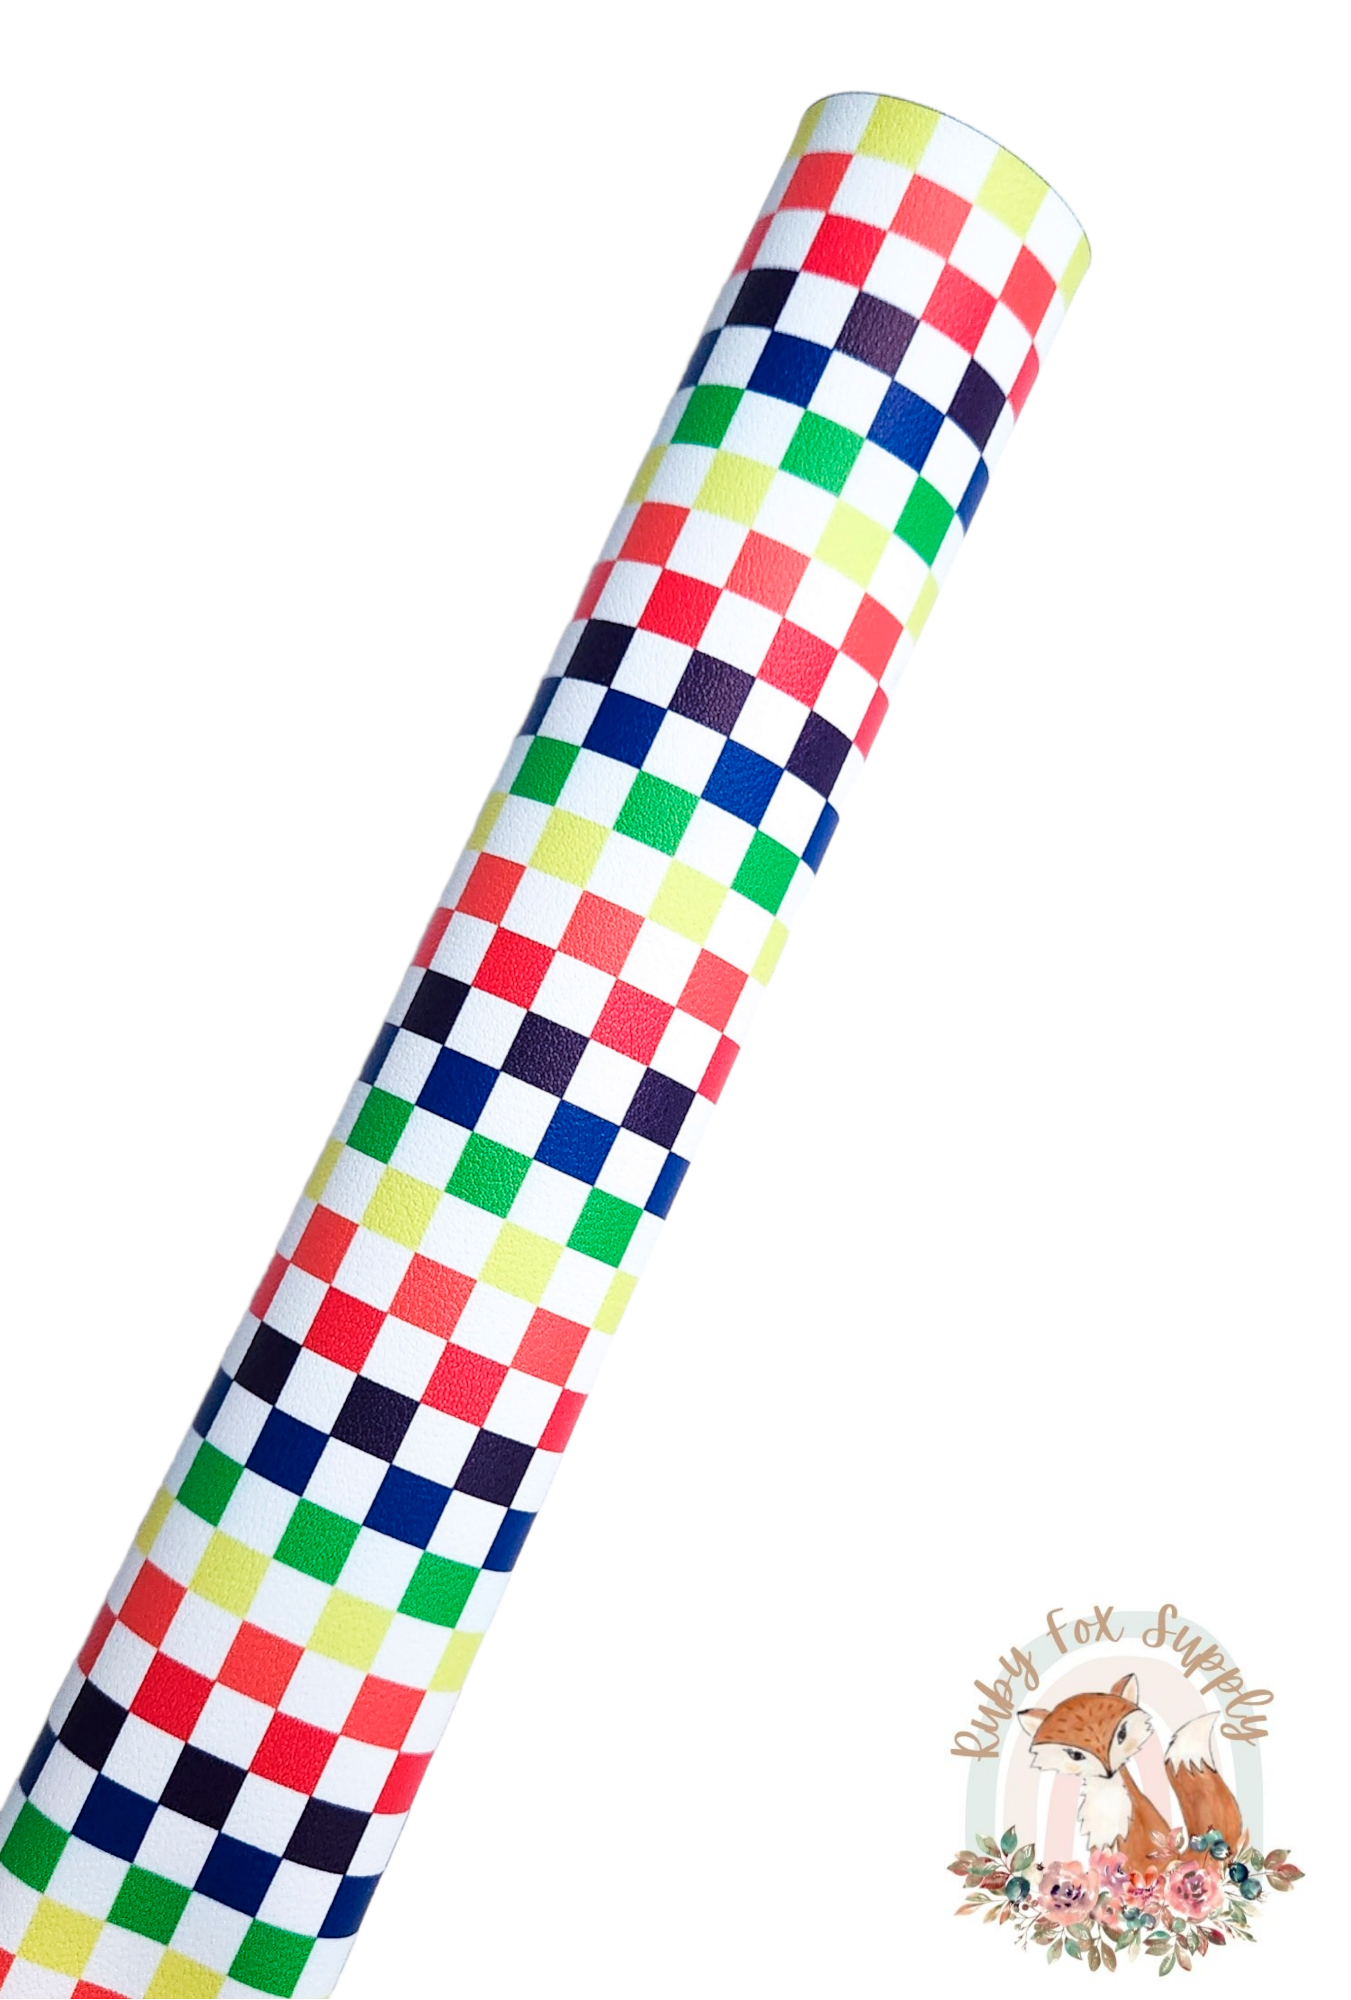 Rainbow Checkers 9x12 faux leather sheet